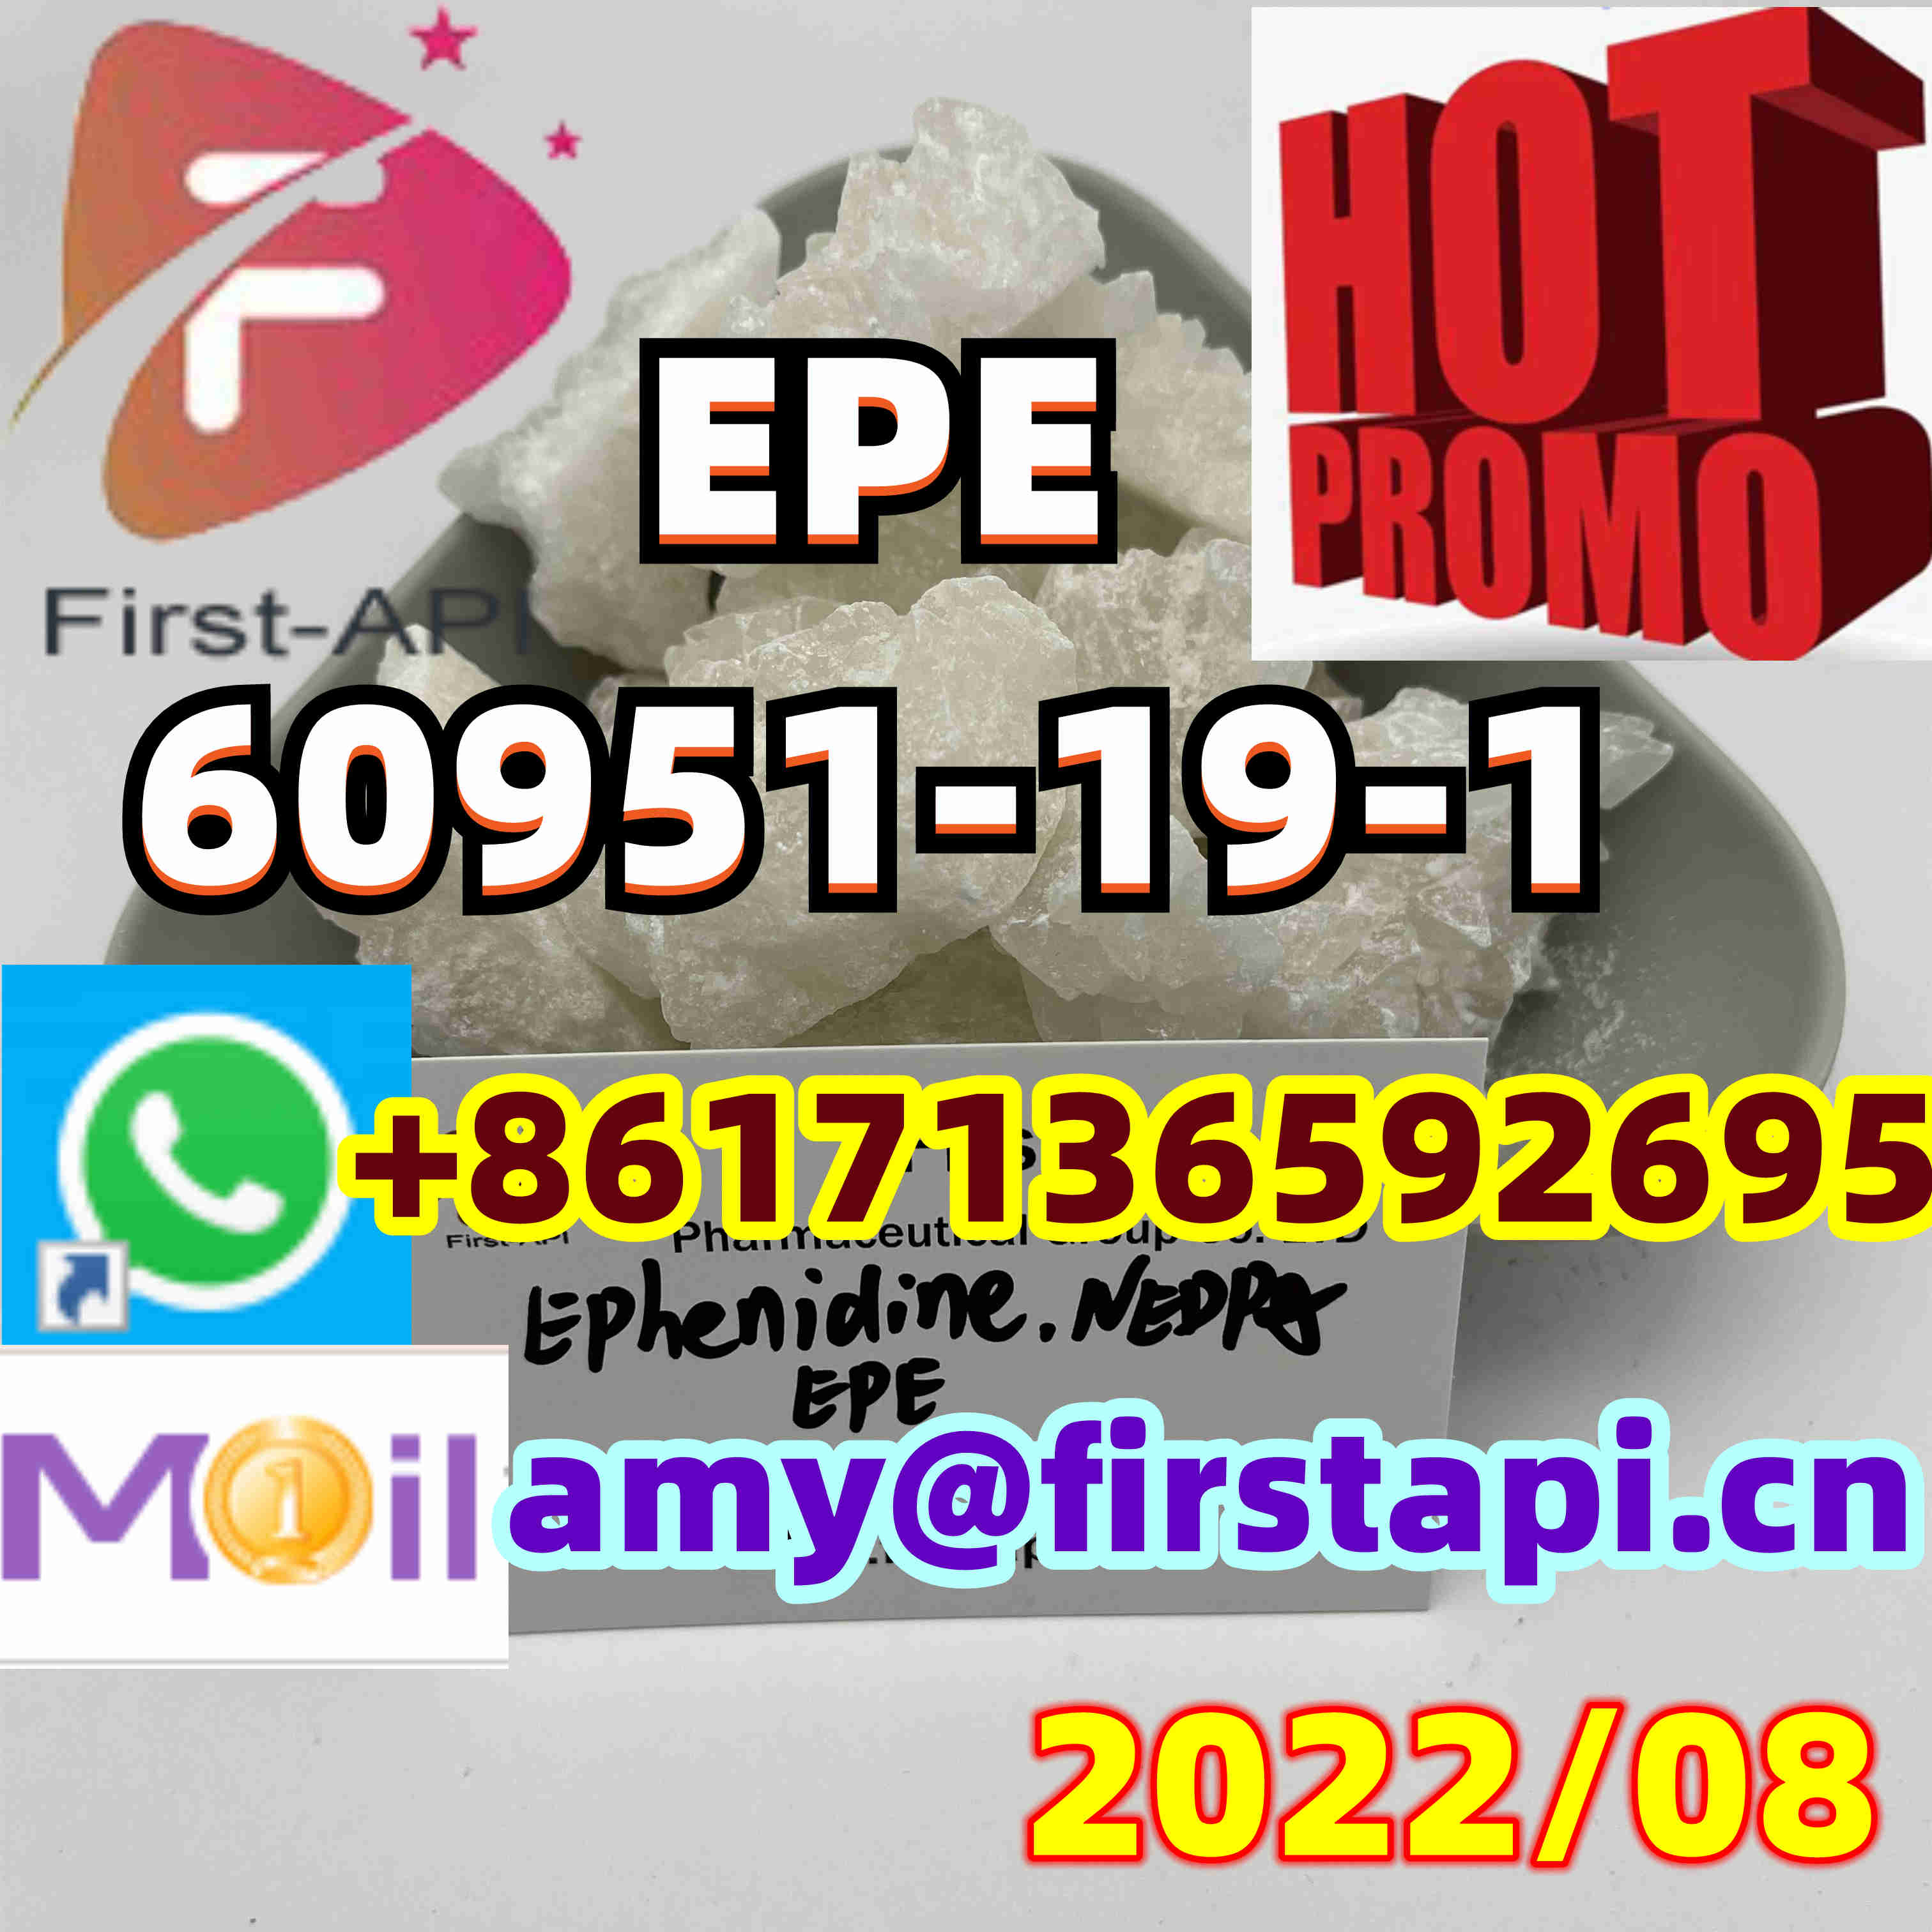 CAS:60951-19-1,EPE,Ephenidine,high quality,low price,fast delivery,, - photo